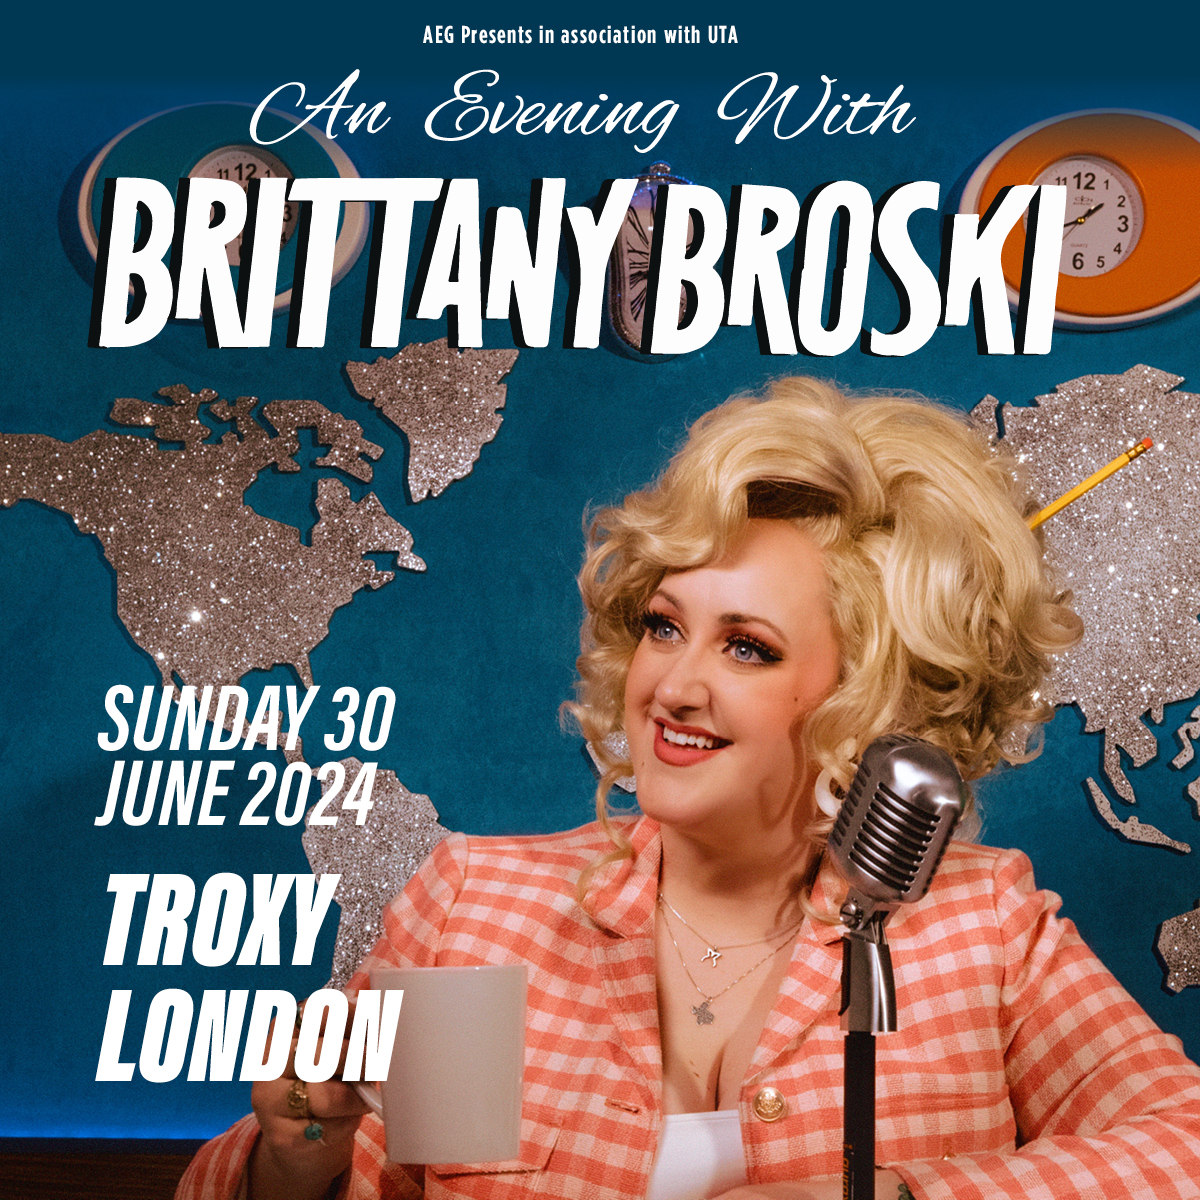 🔥🎤 For one night and one night only, come join Supreme Leader @brittany_broski for an in-real-life town hall meeting! Prepare for an evening full of laughter, cheek, and a special guest! ⏰ Tickets are on sale now 🎫 w.axs.com/1ZPe50Rhehm